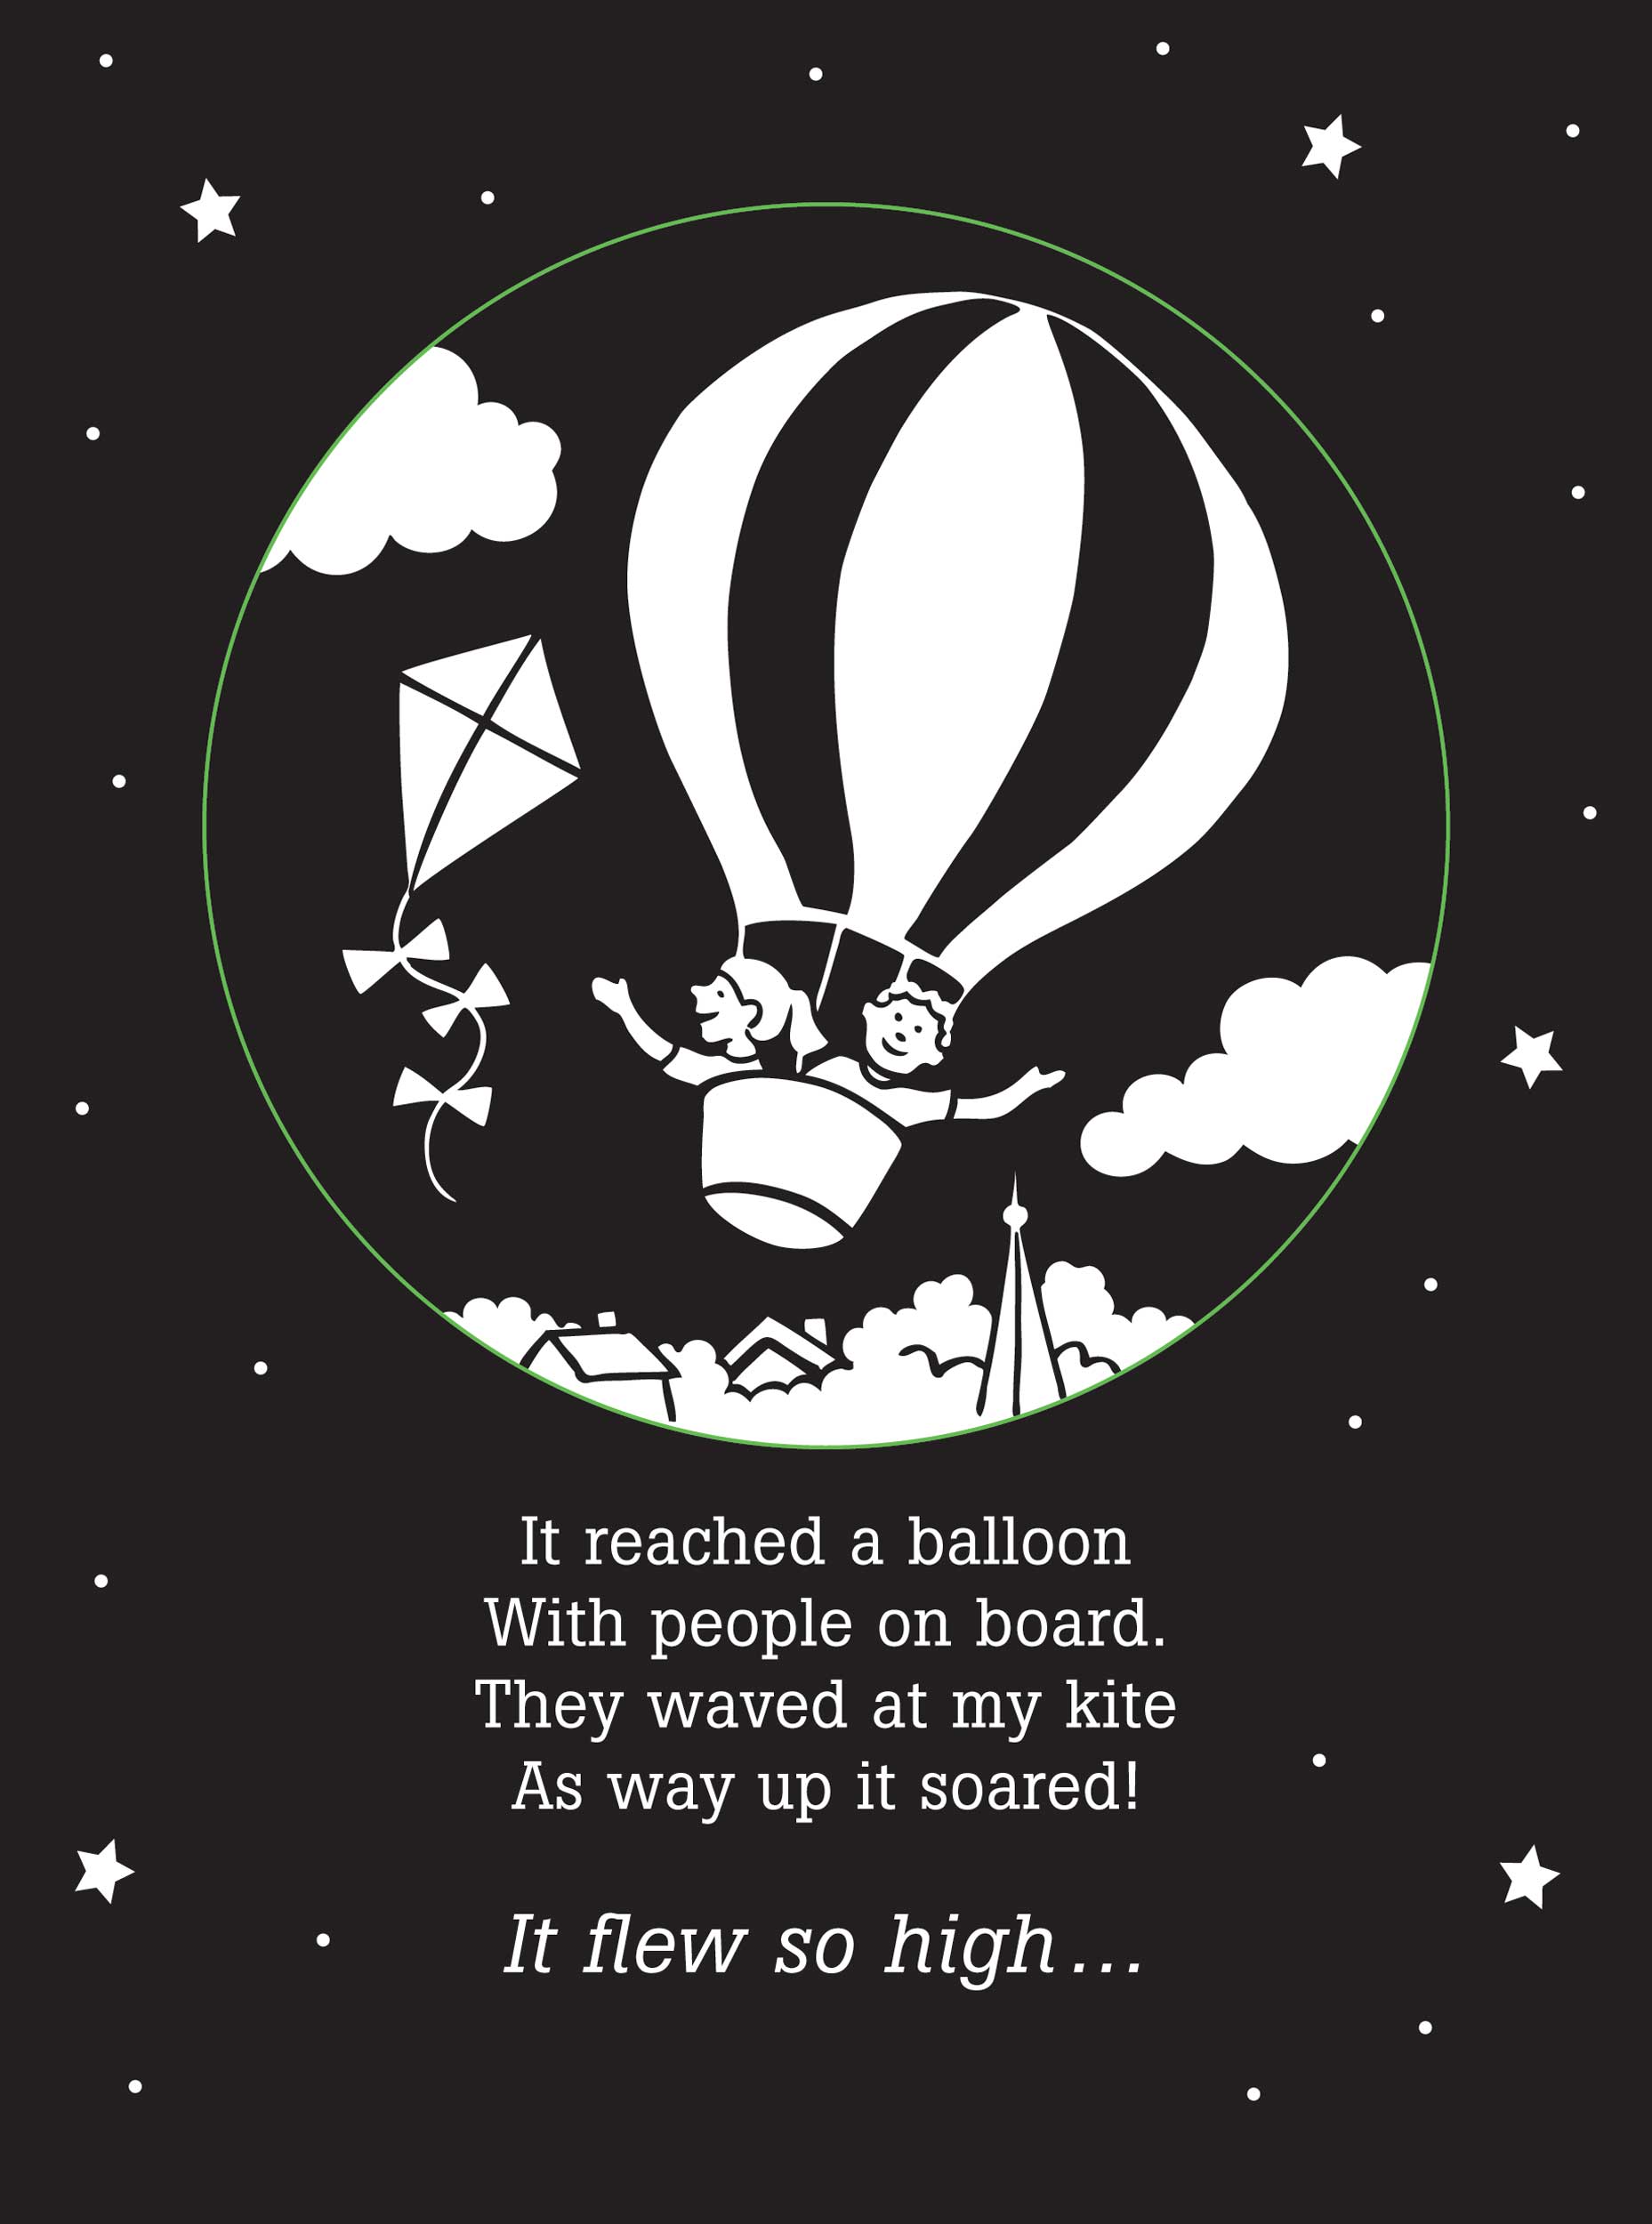 Up, Up, And Away! - A Bedtime Shadow Book    